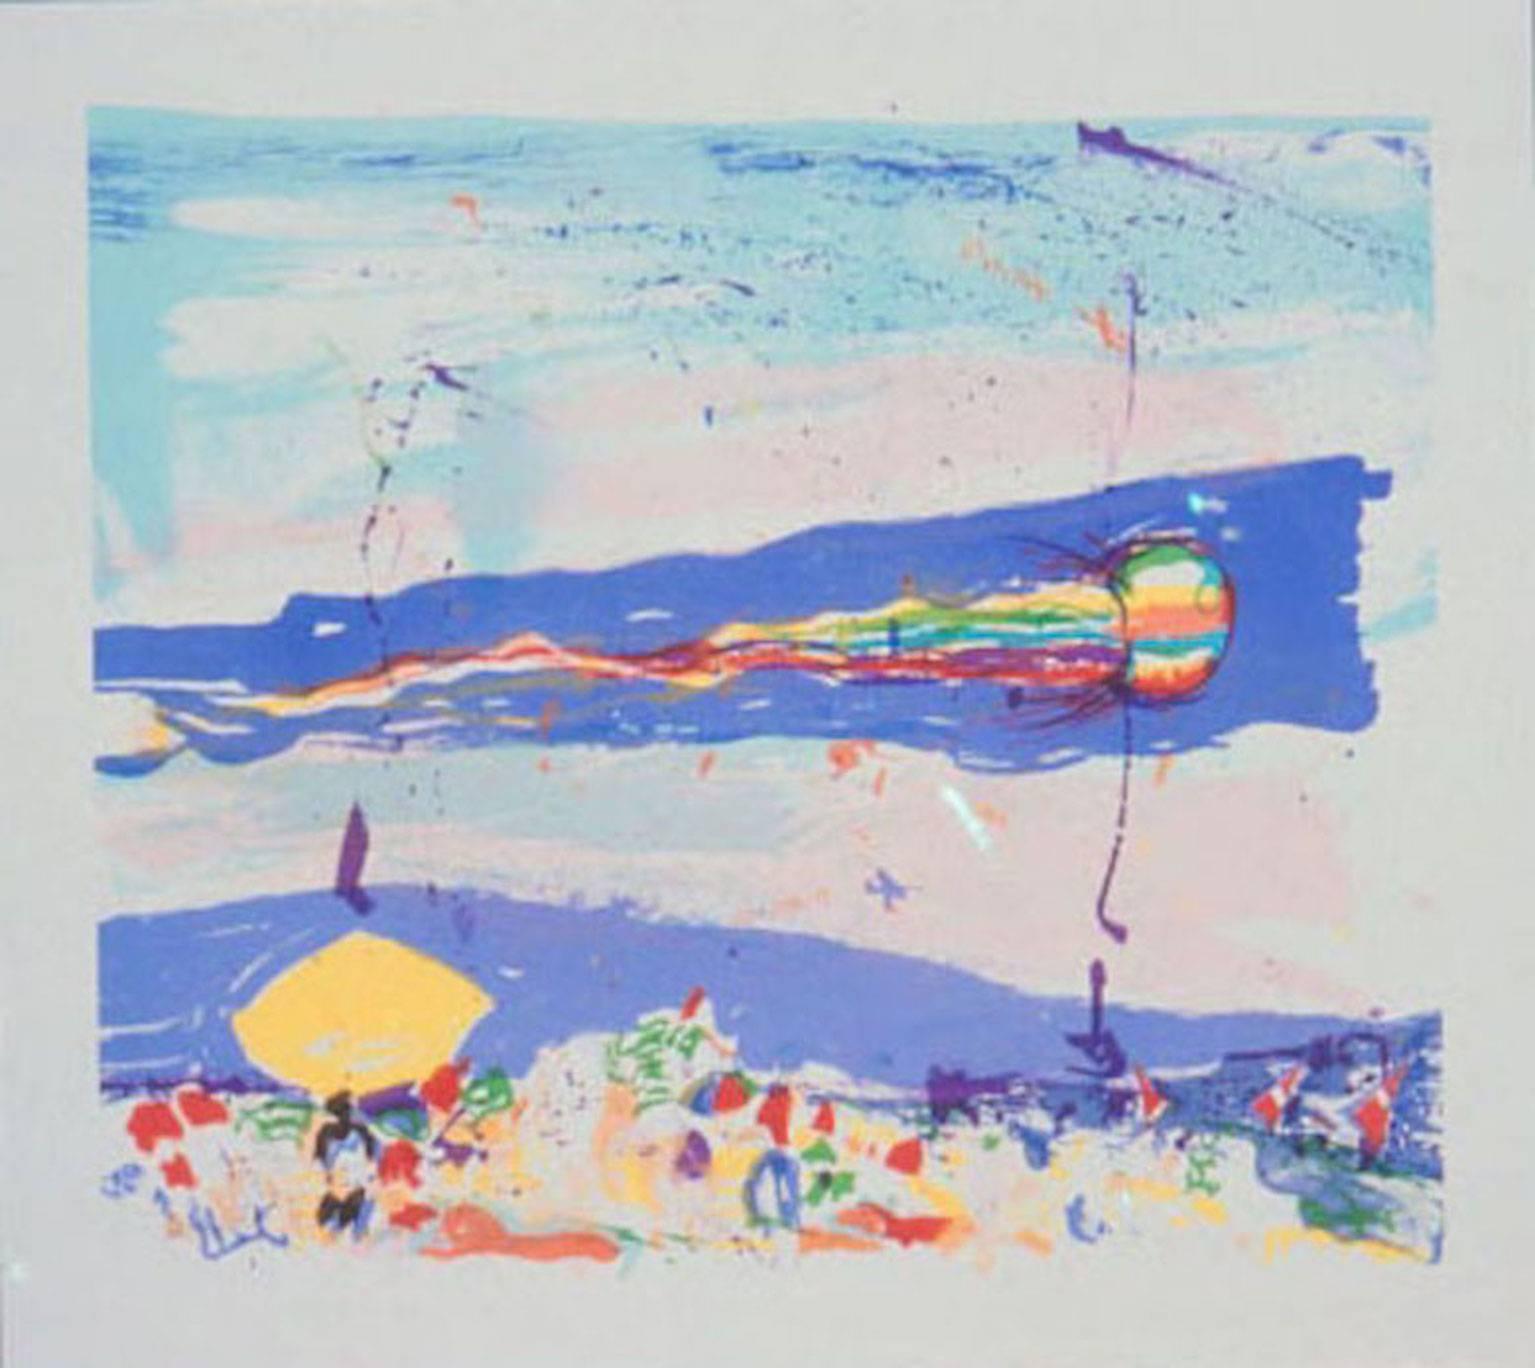 Malcolm Morley Landscape Print - Kite on Gibson Beach, Contemporary abstract landscape print